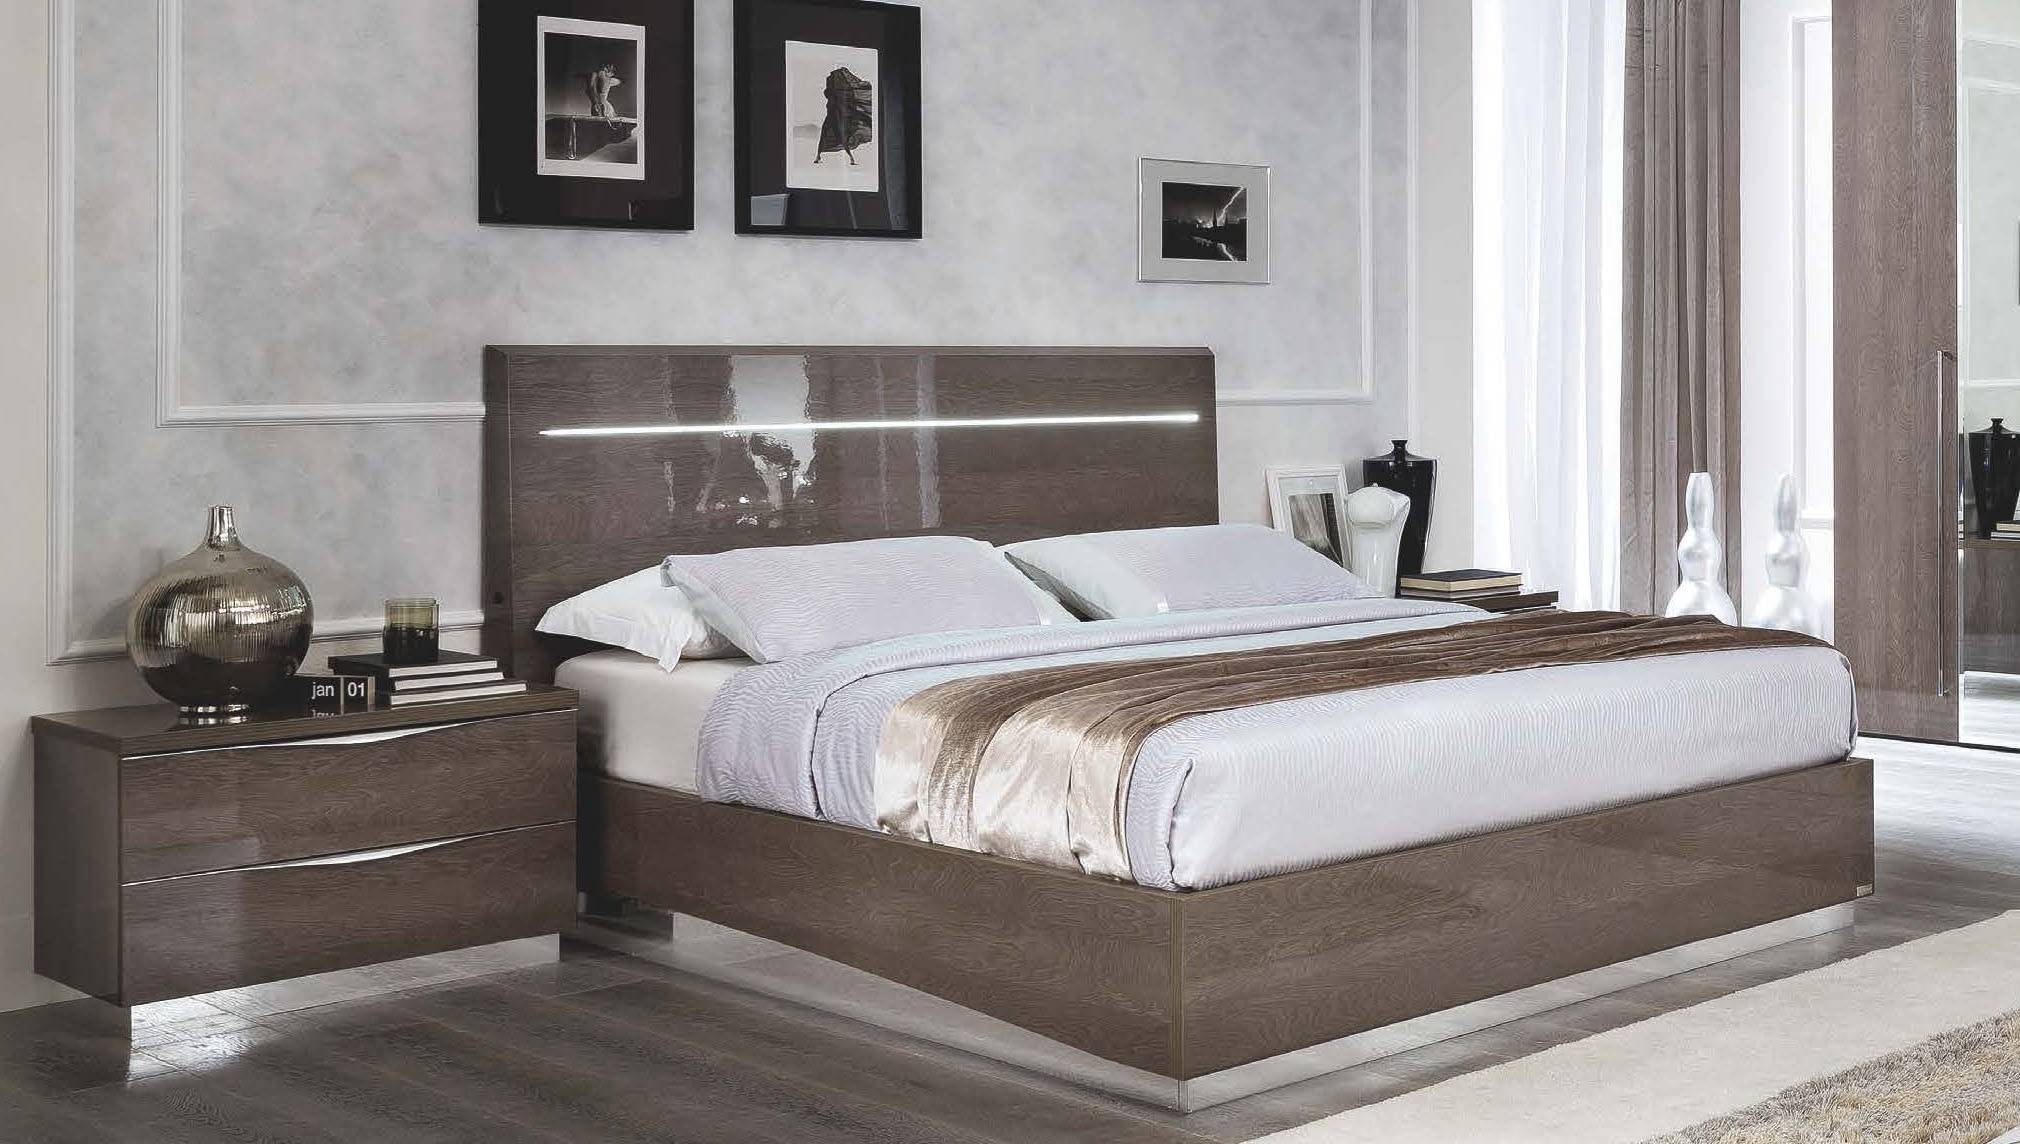 Made In Italy Quality High End Bedroom Sets pertaining to sizing 2020 X 1144